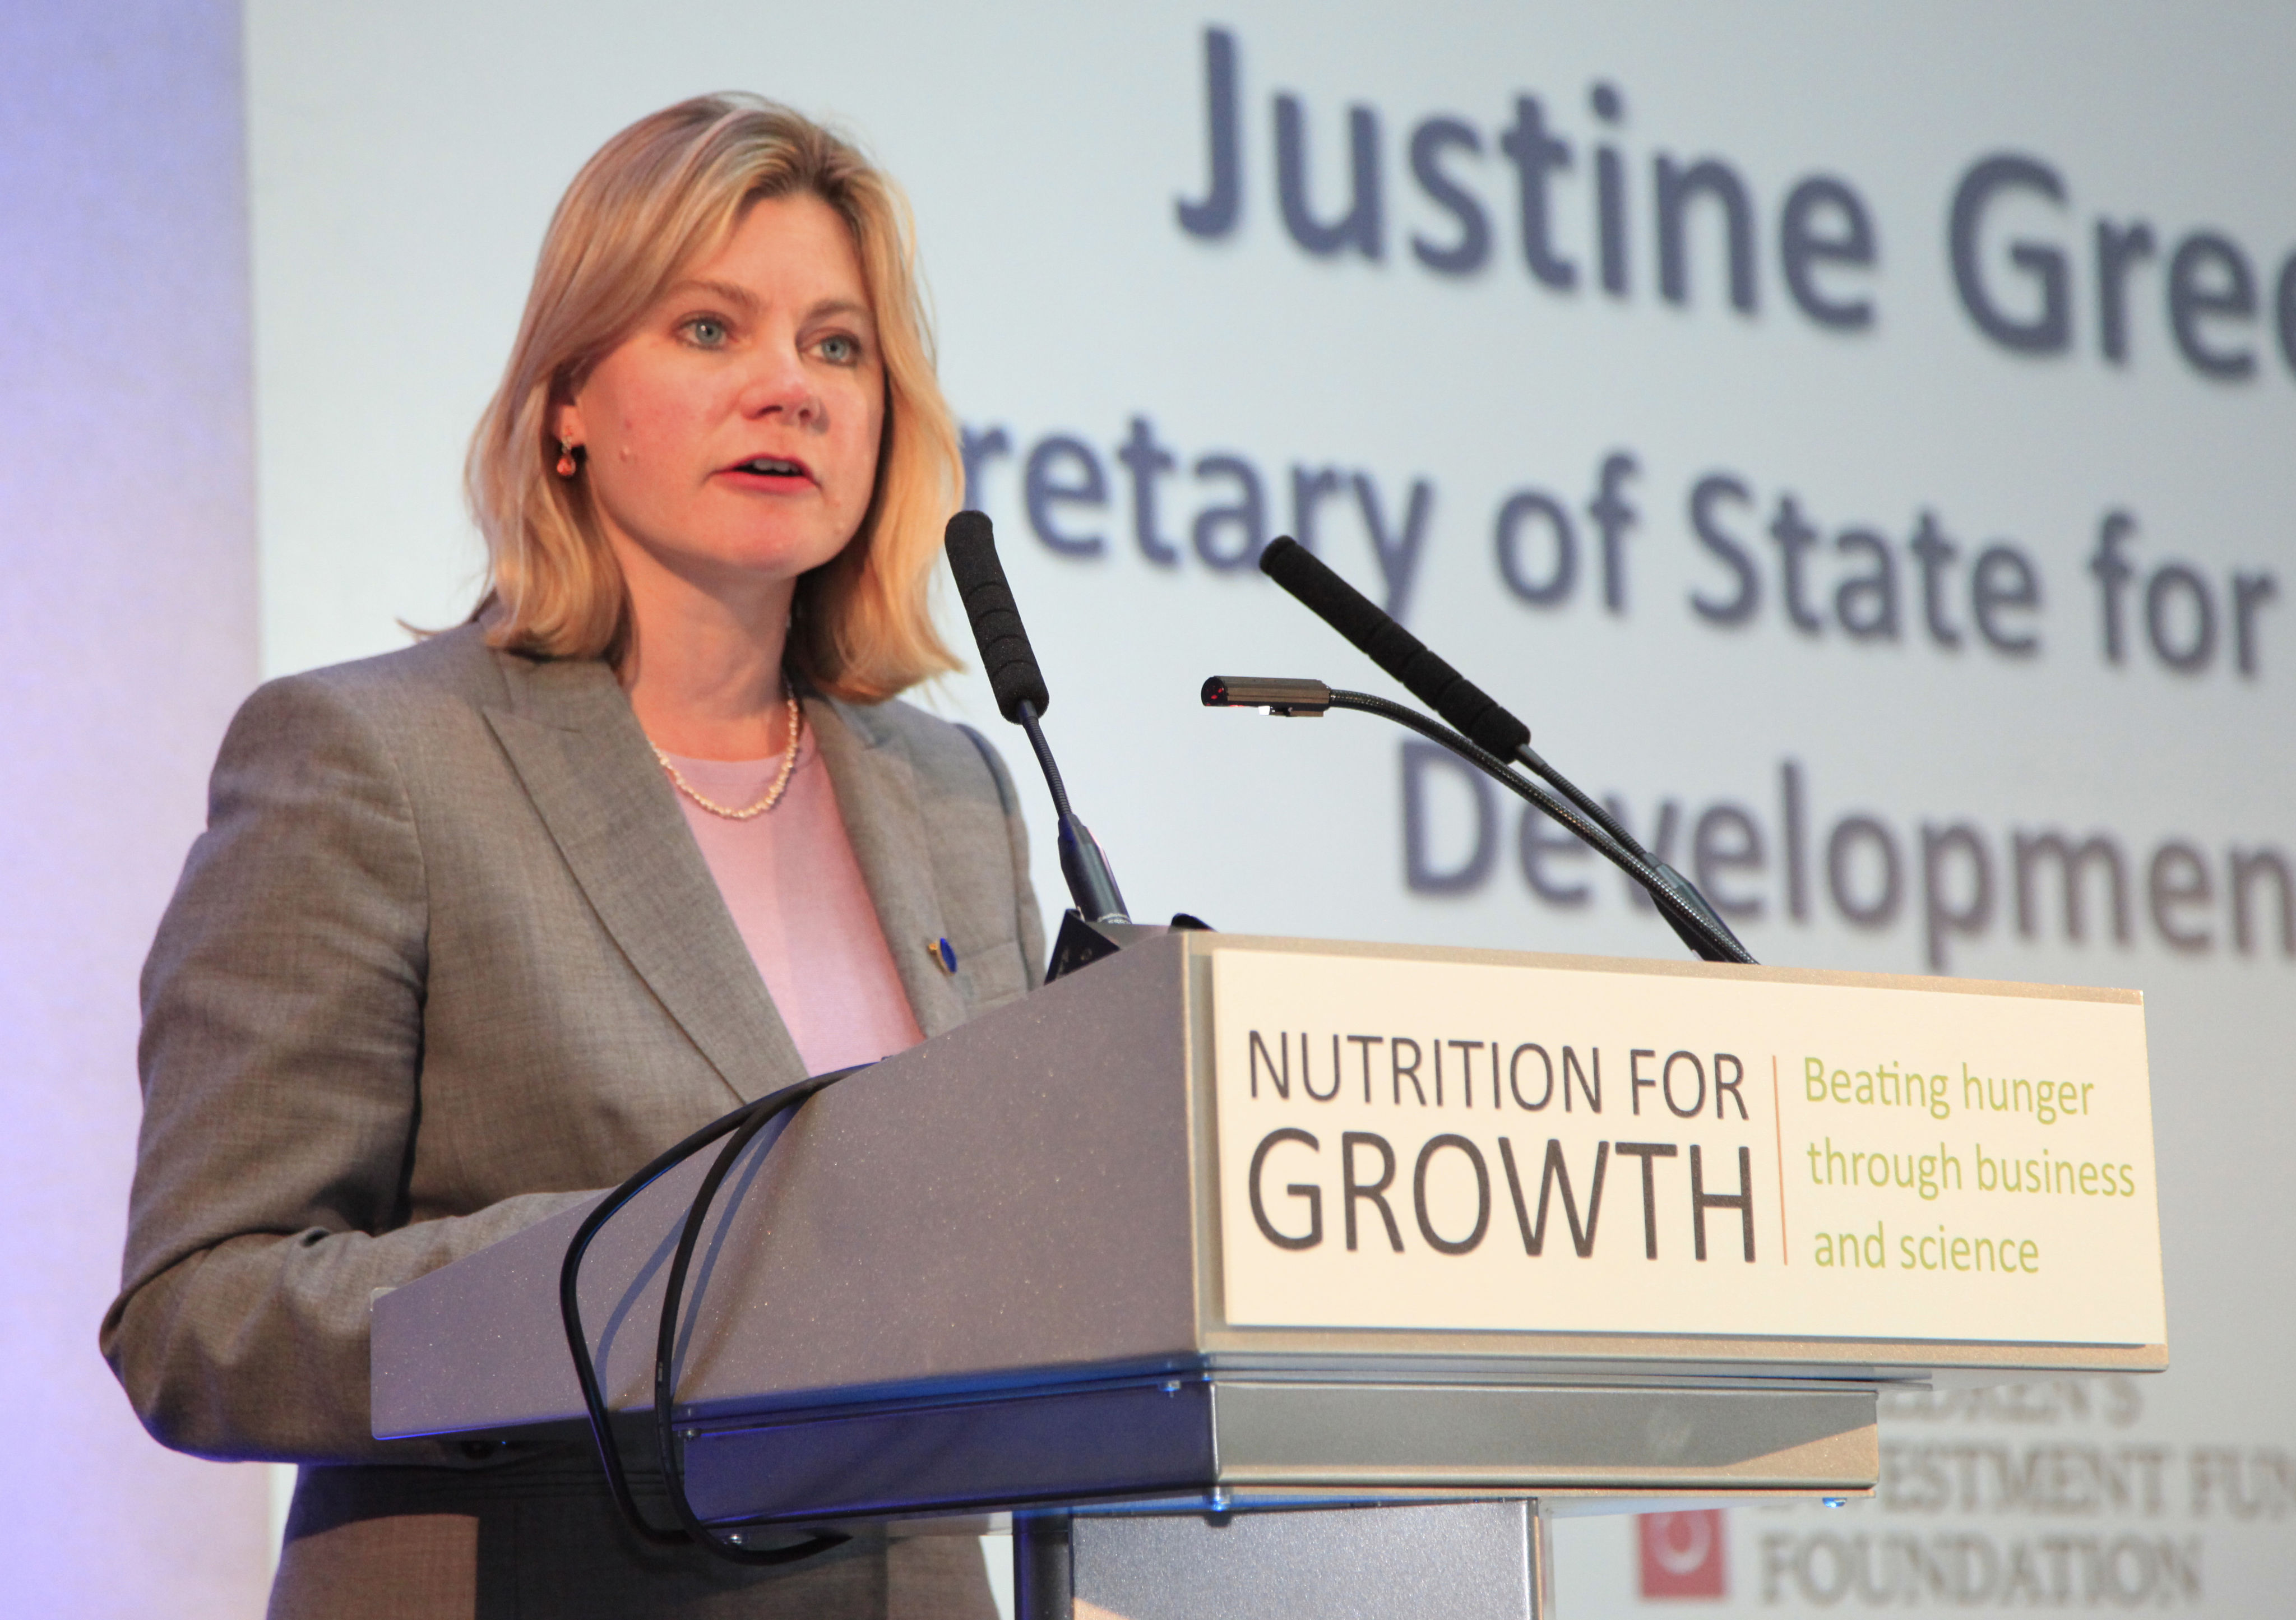 Justine Greening, Secretary of State for International Development, at a podium labelled "Nutrition for Growth"